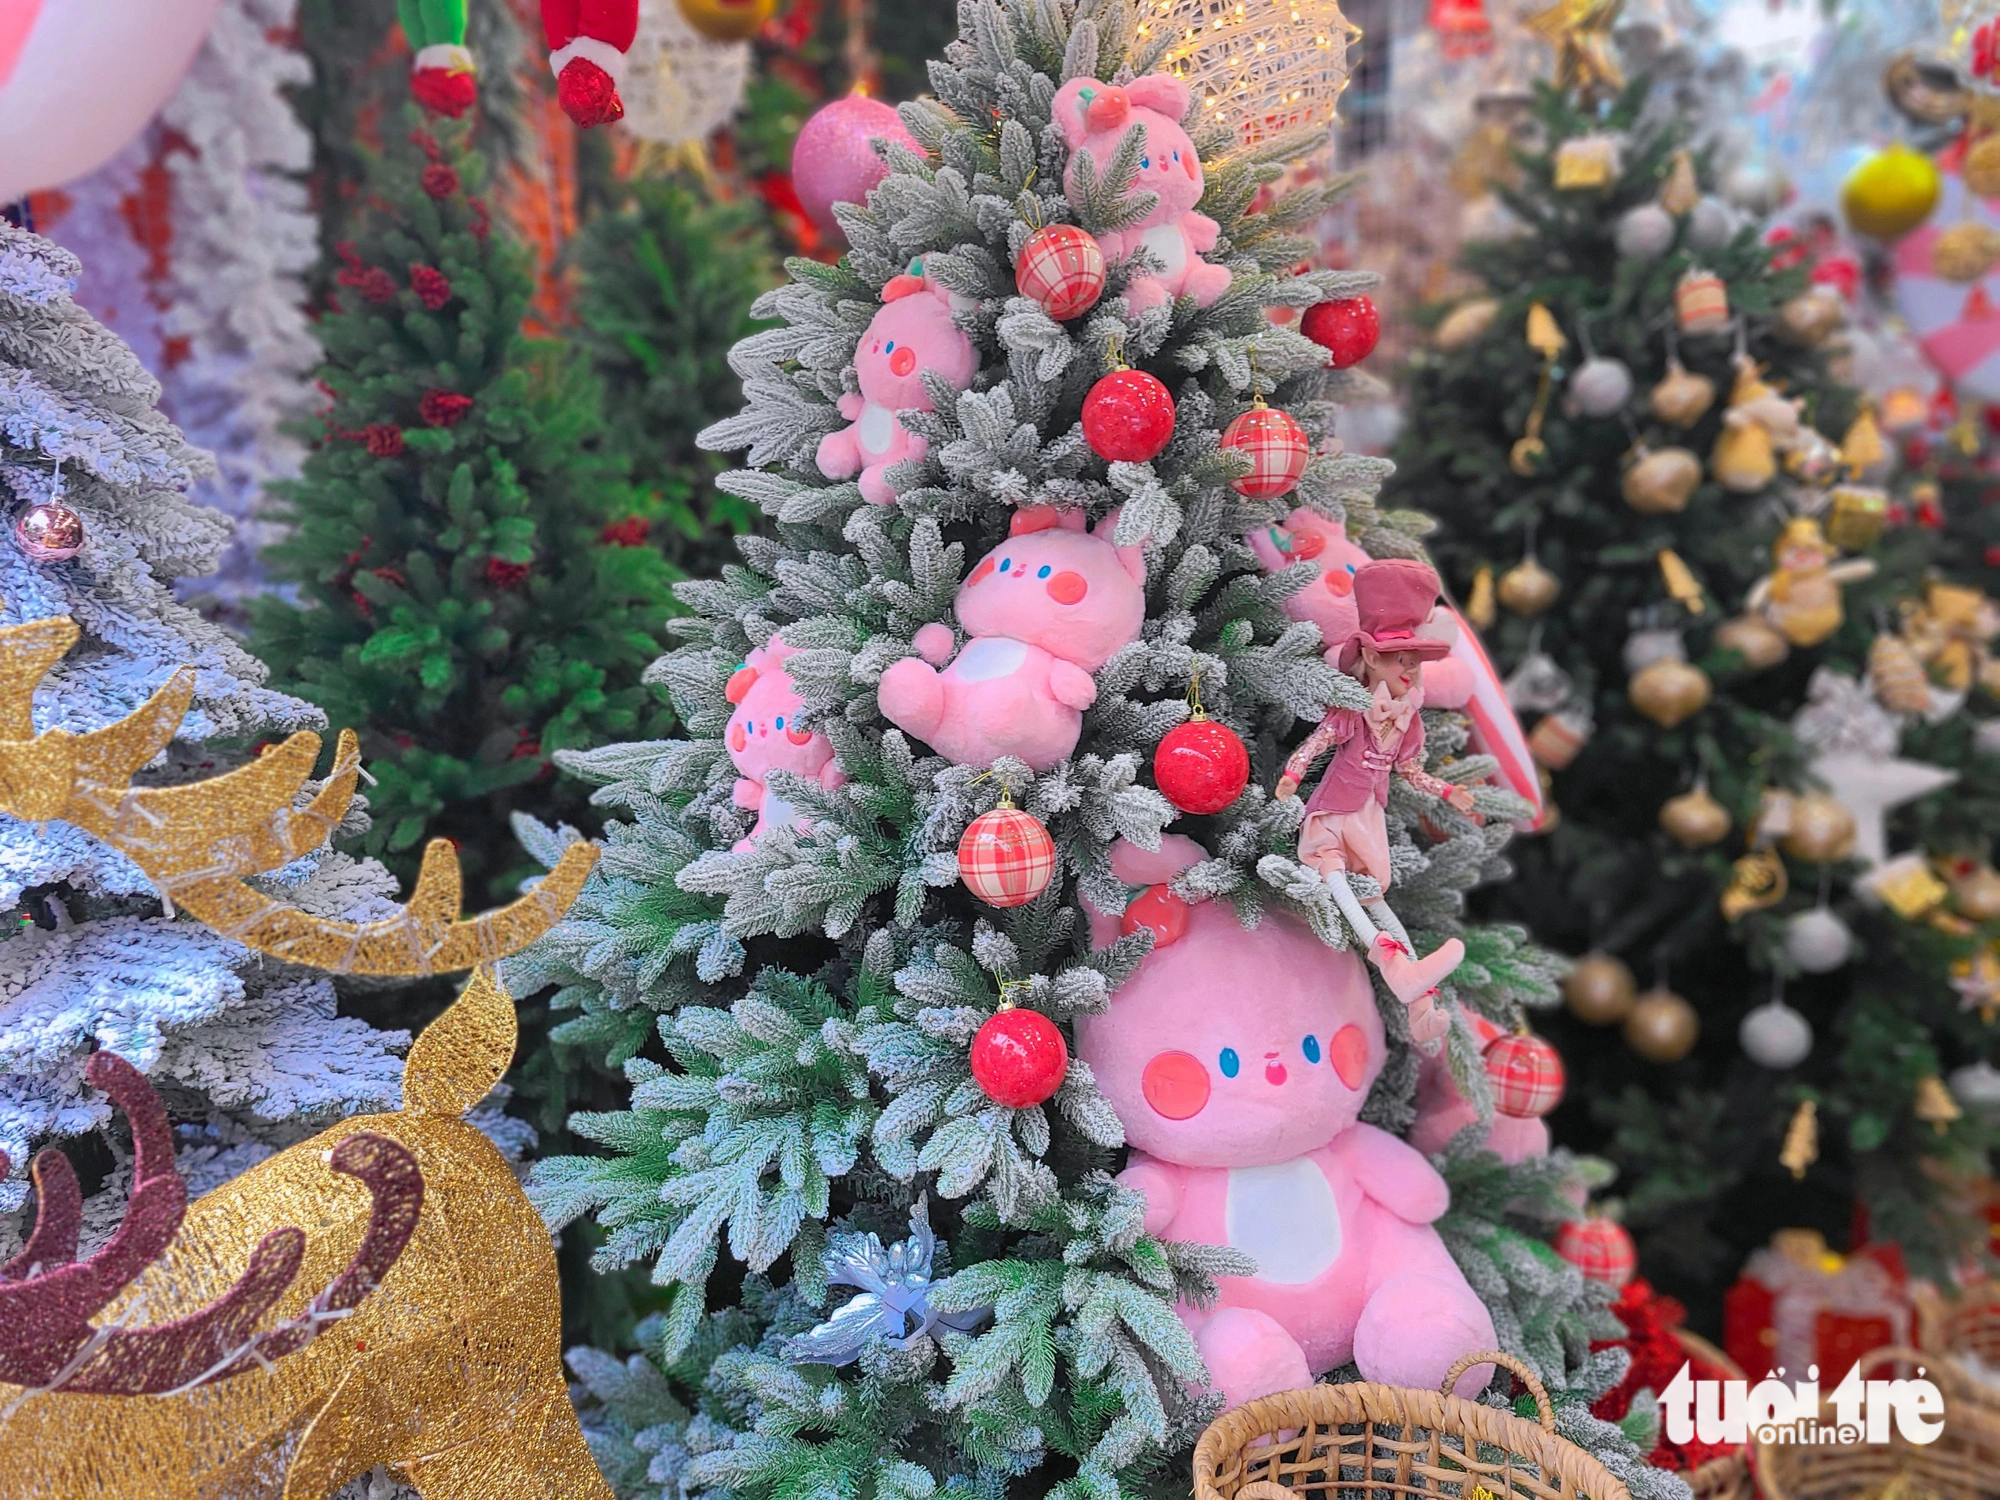 A decorative pine tree is displayed at a shop in Ho Chi Minh City. Photo: Nhat Xuan / Tuoi Tre